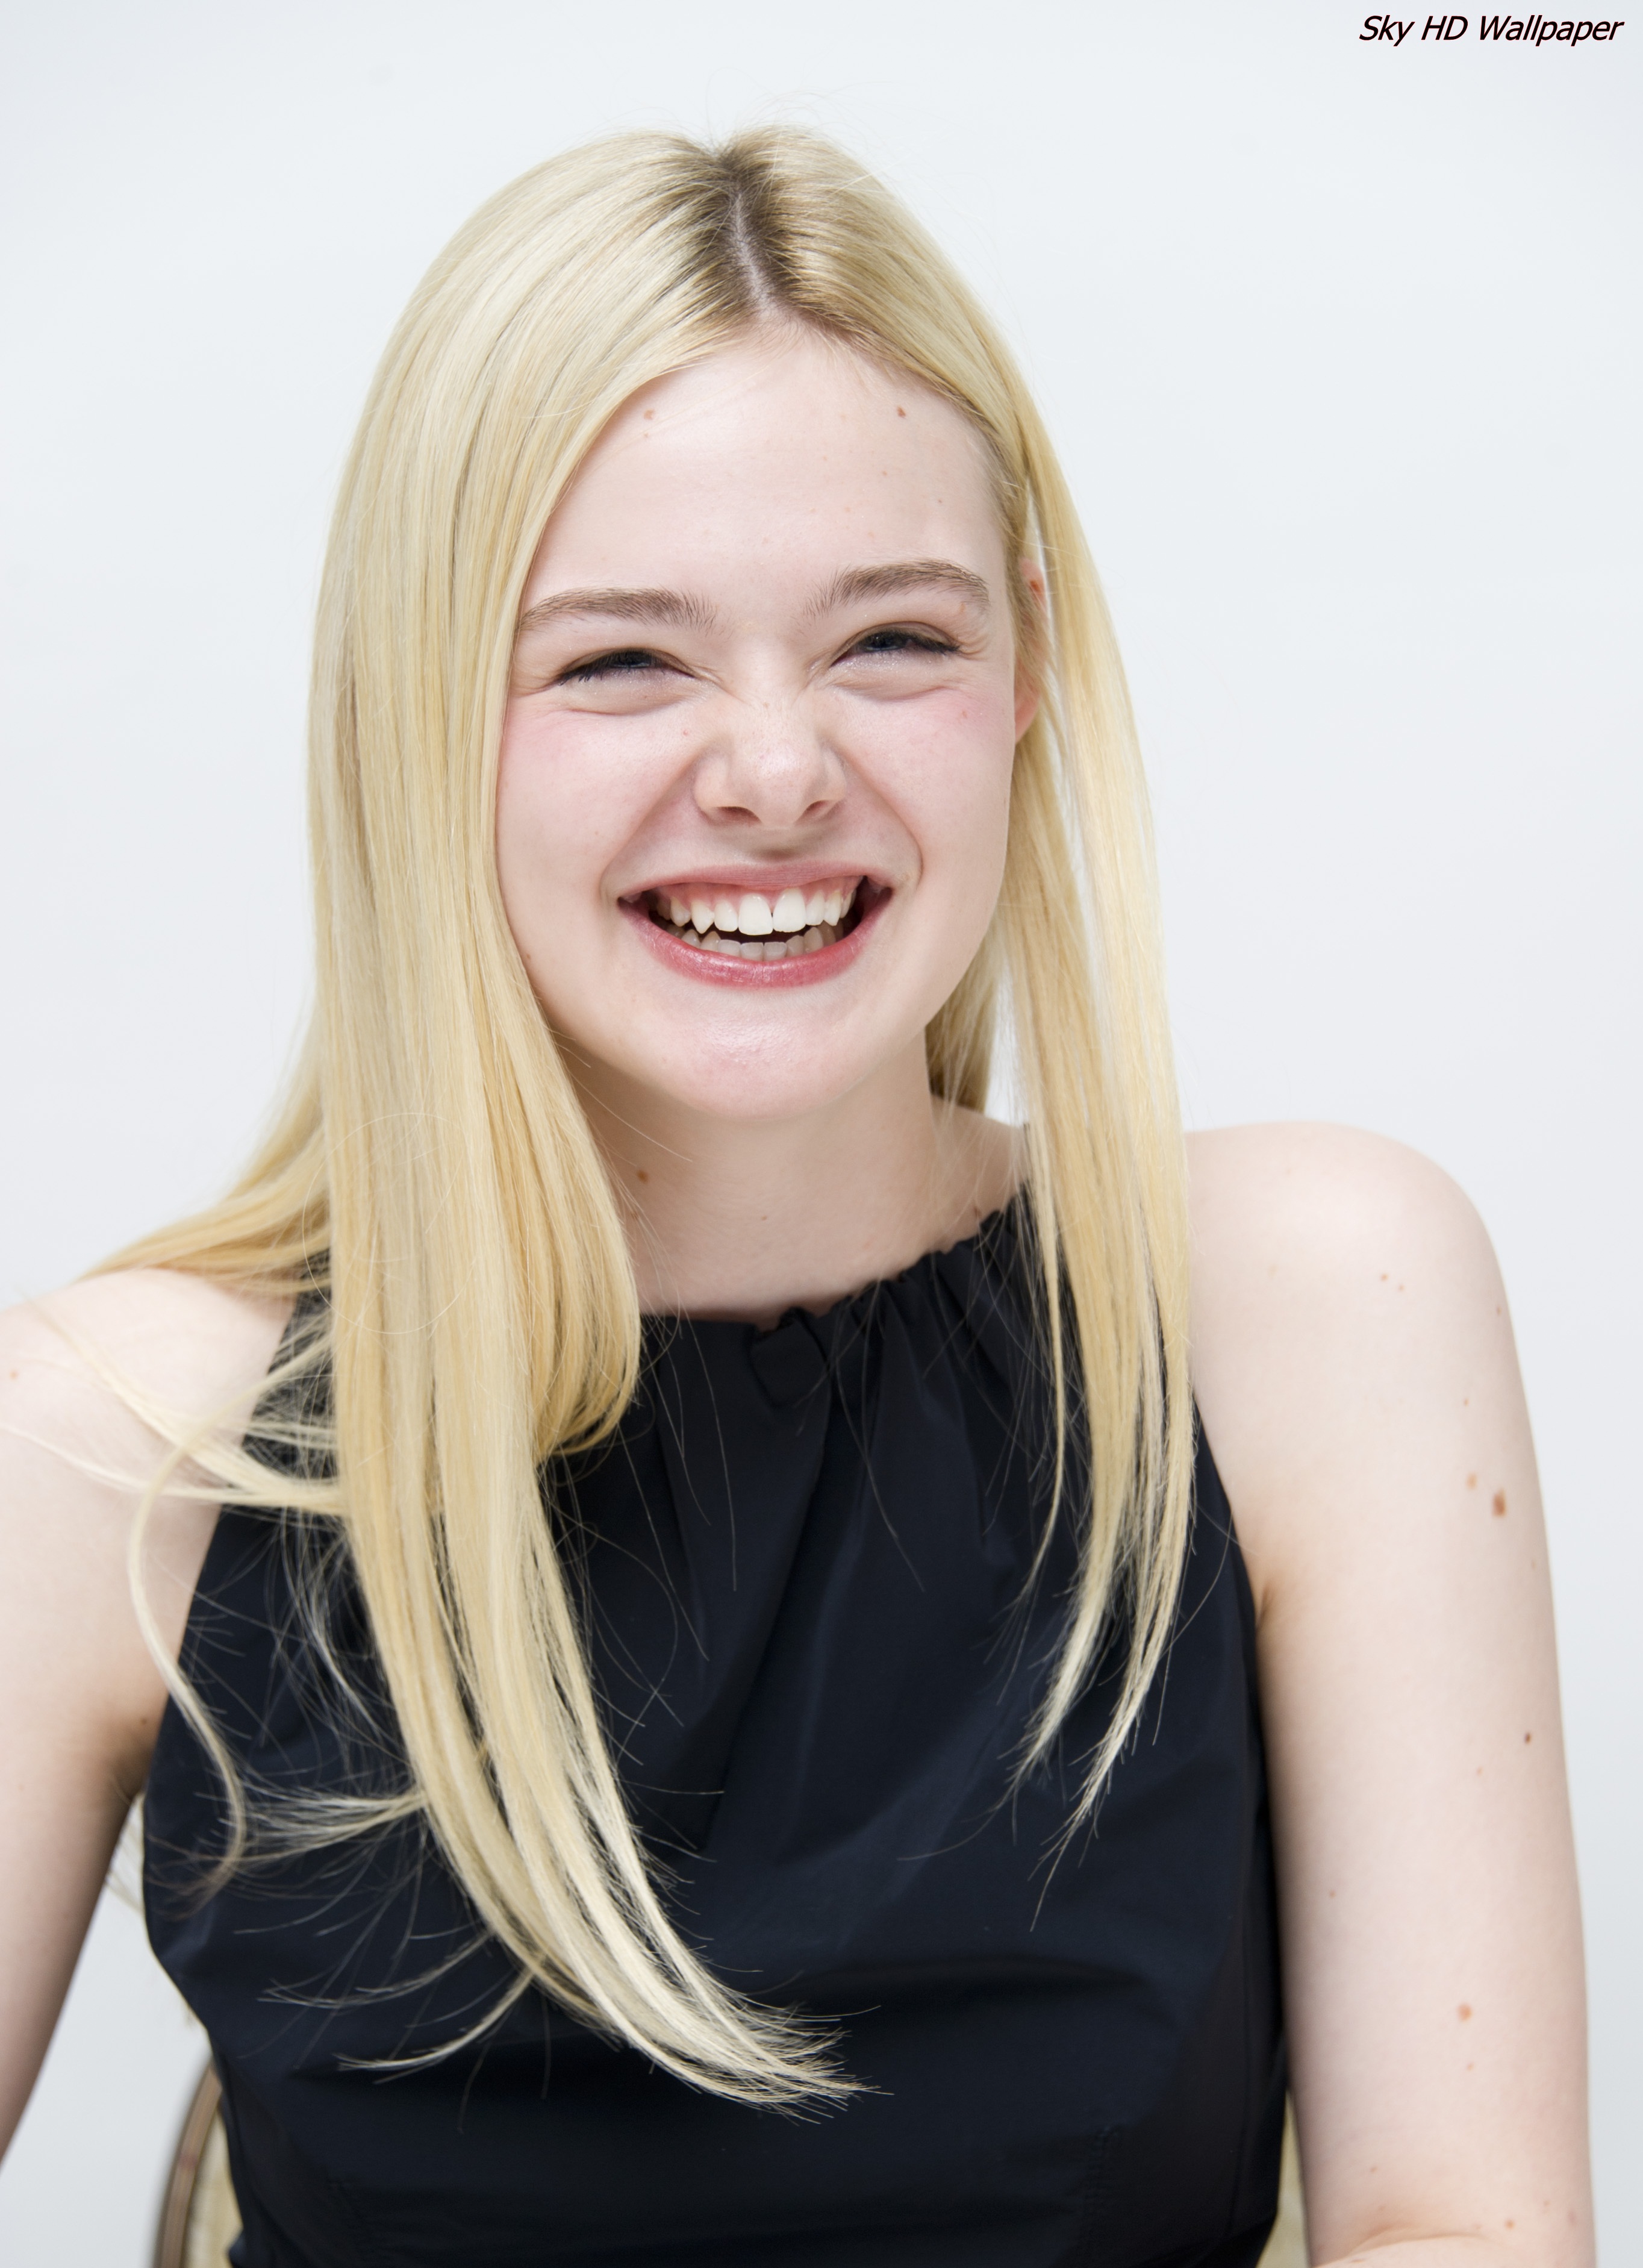 Elle Fanning The Great Hd Wallpapers